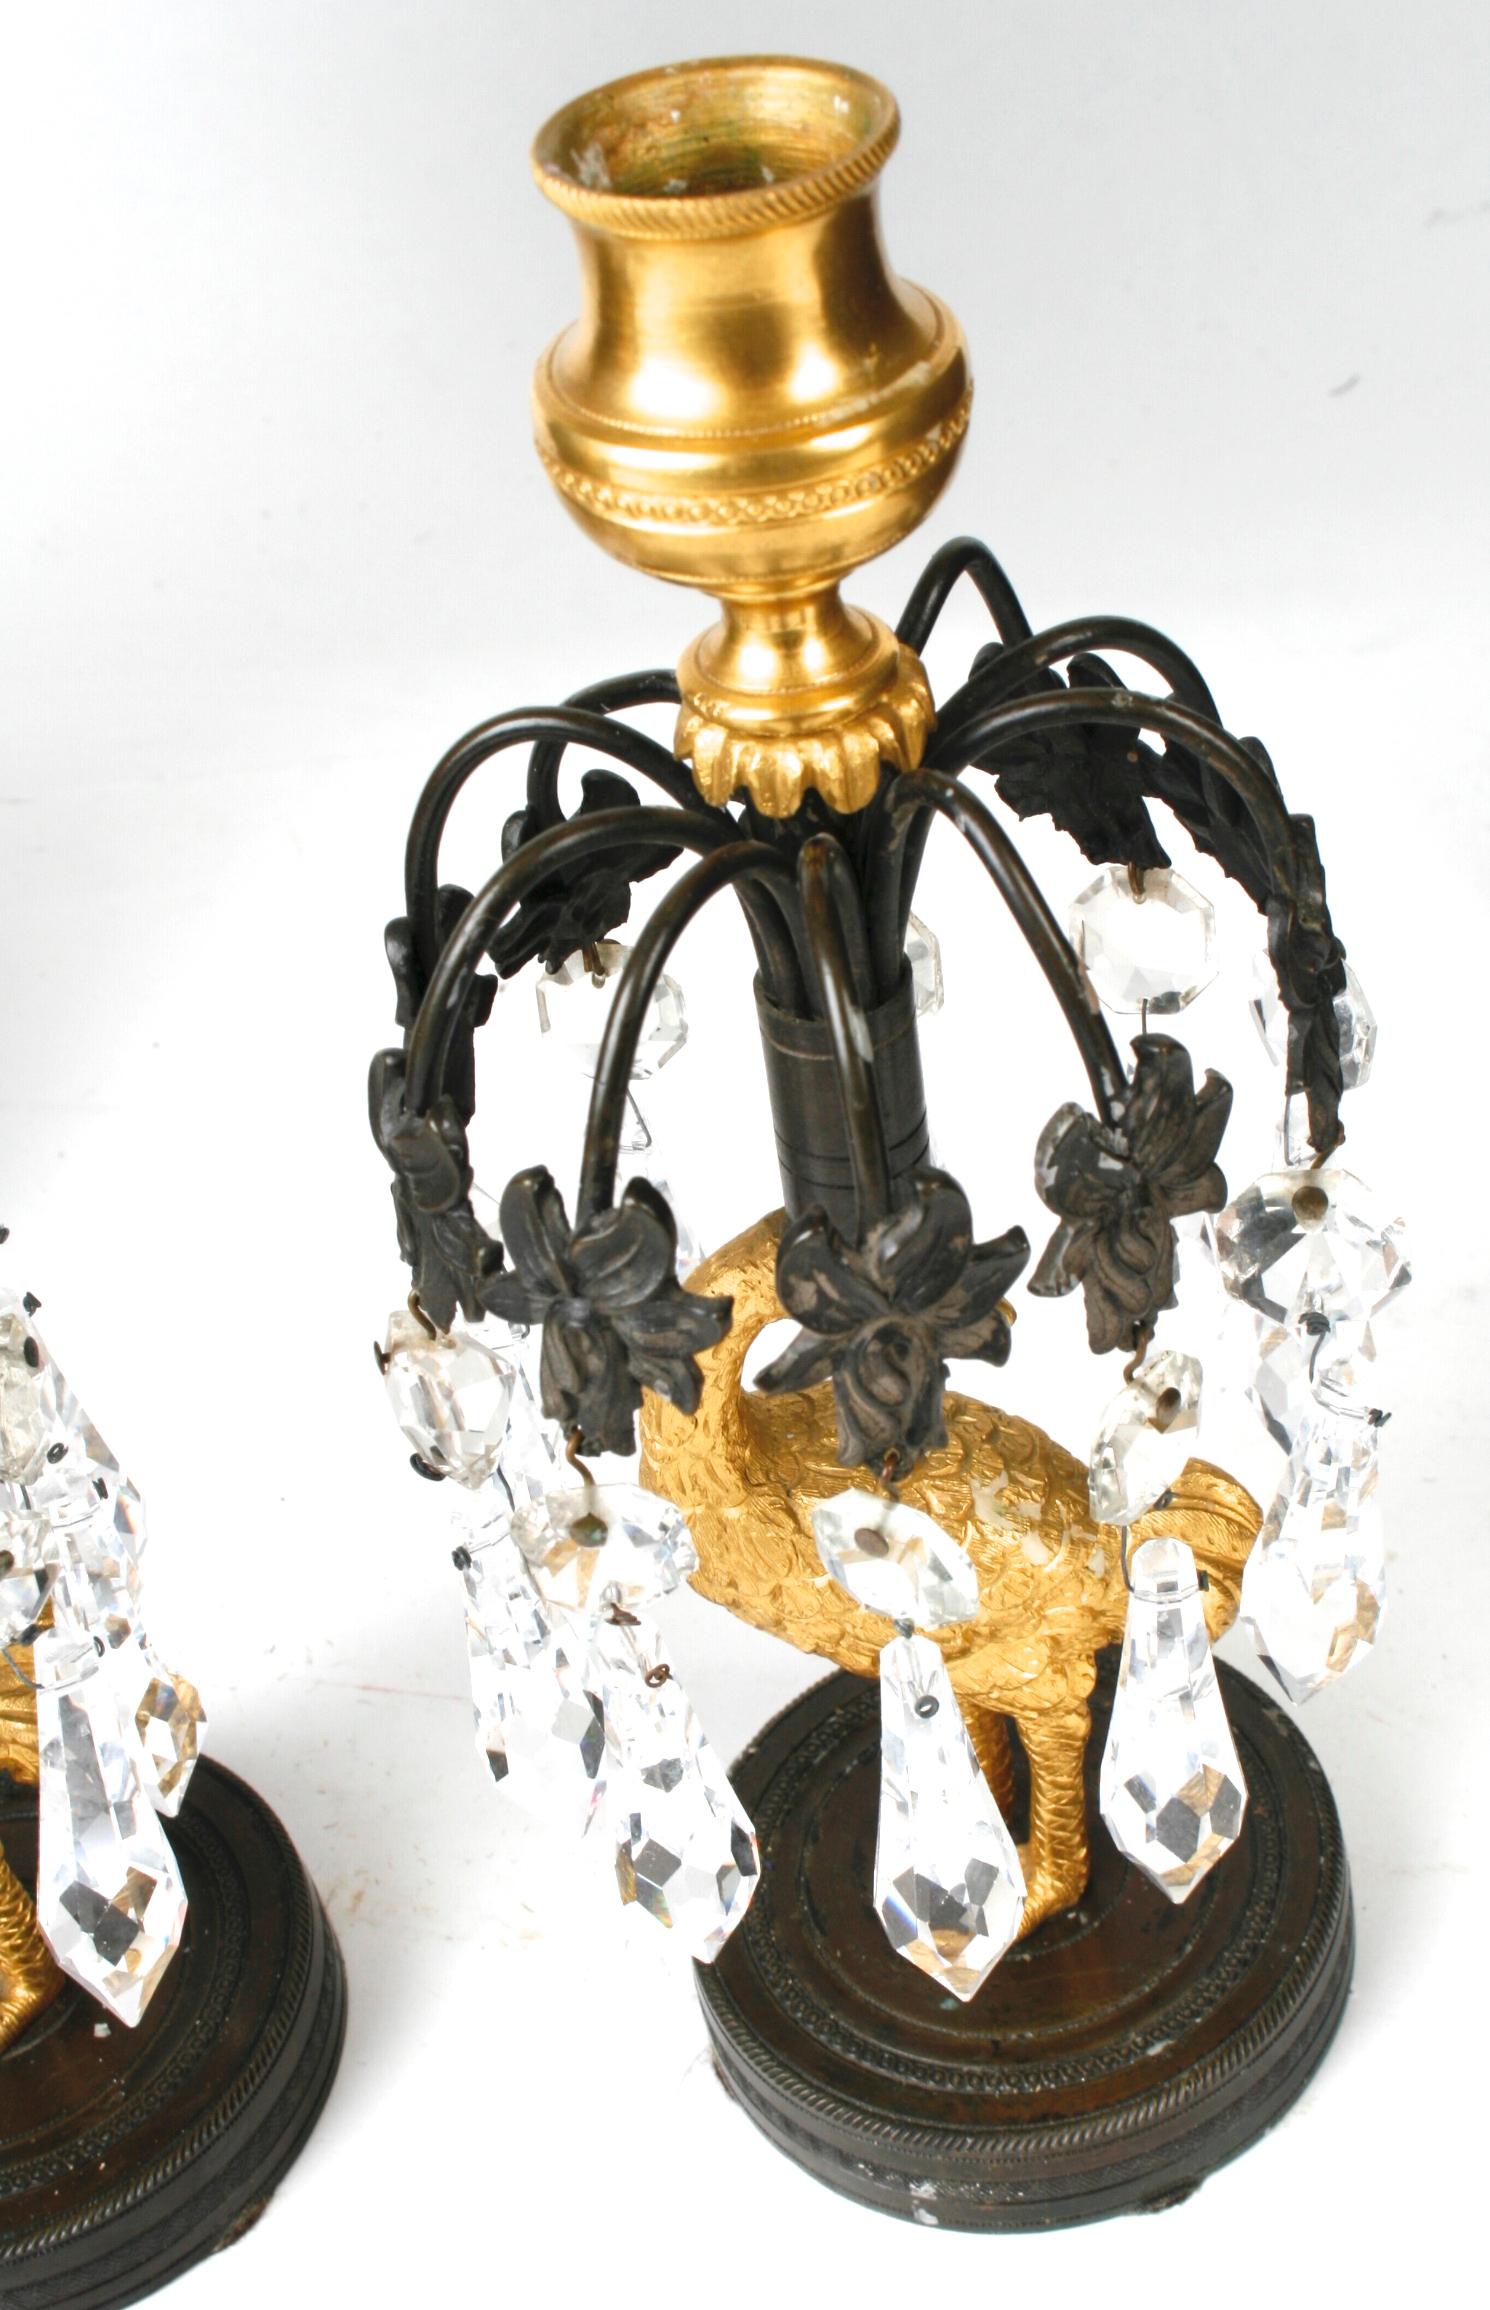 A pair of early 19th century Regency period gilt and patinated bronze candlesticks. Each has floral sprays with crystal lustres supported on gilt Ostrich shaped stems standing on circular bases. Because of the crystal drops these reflect light when